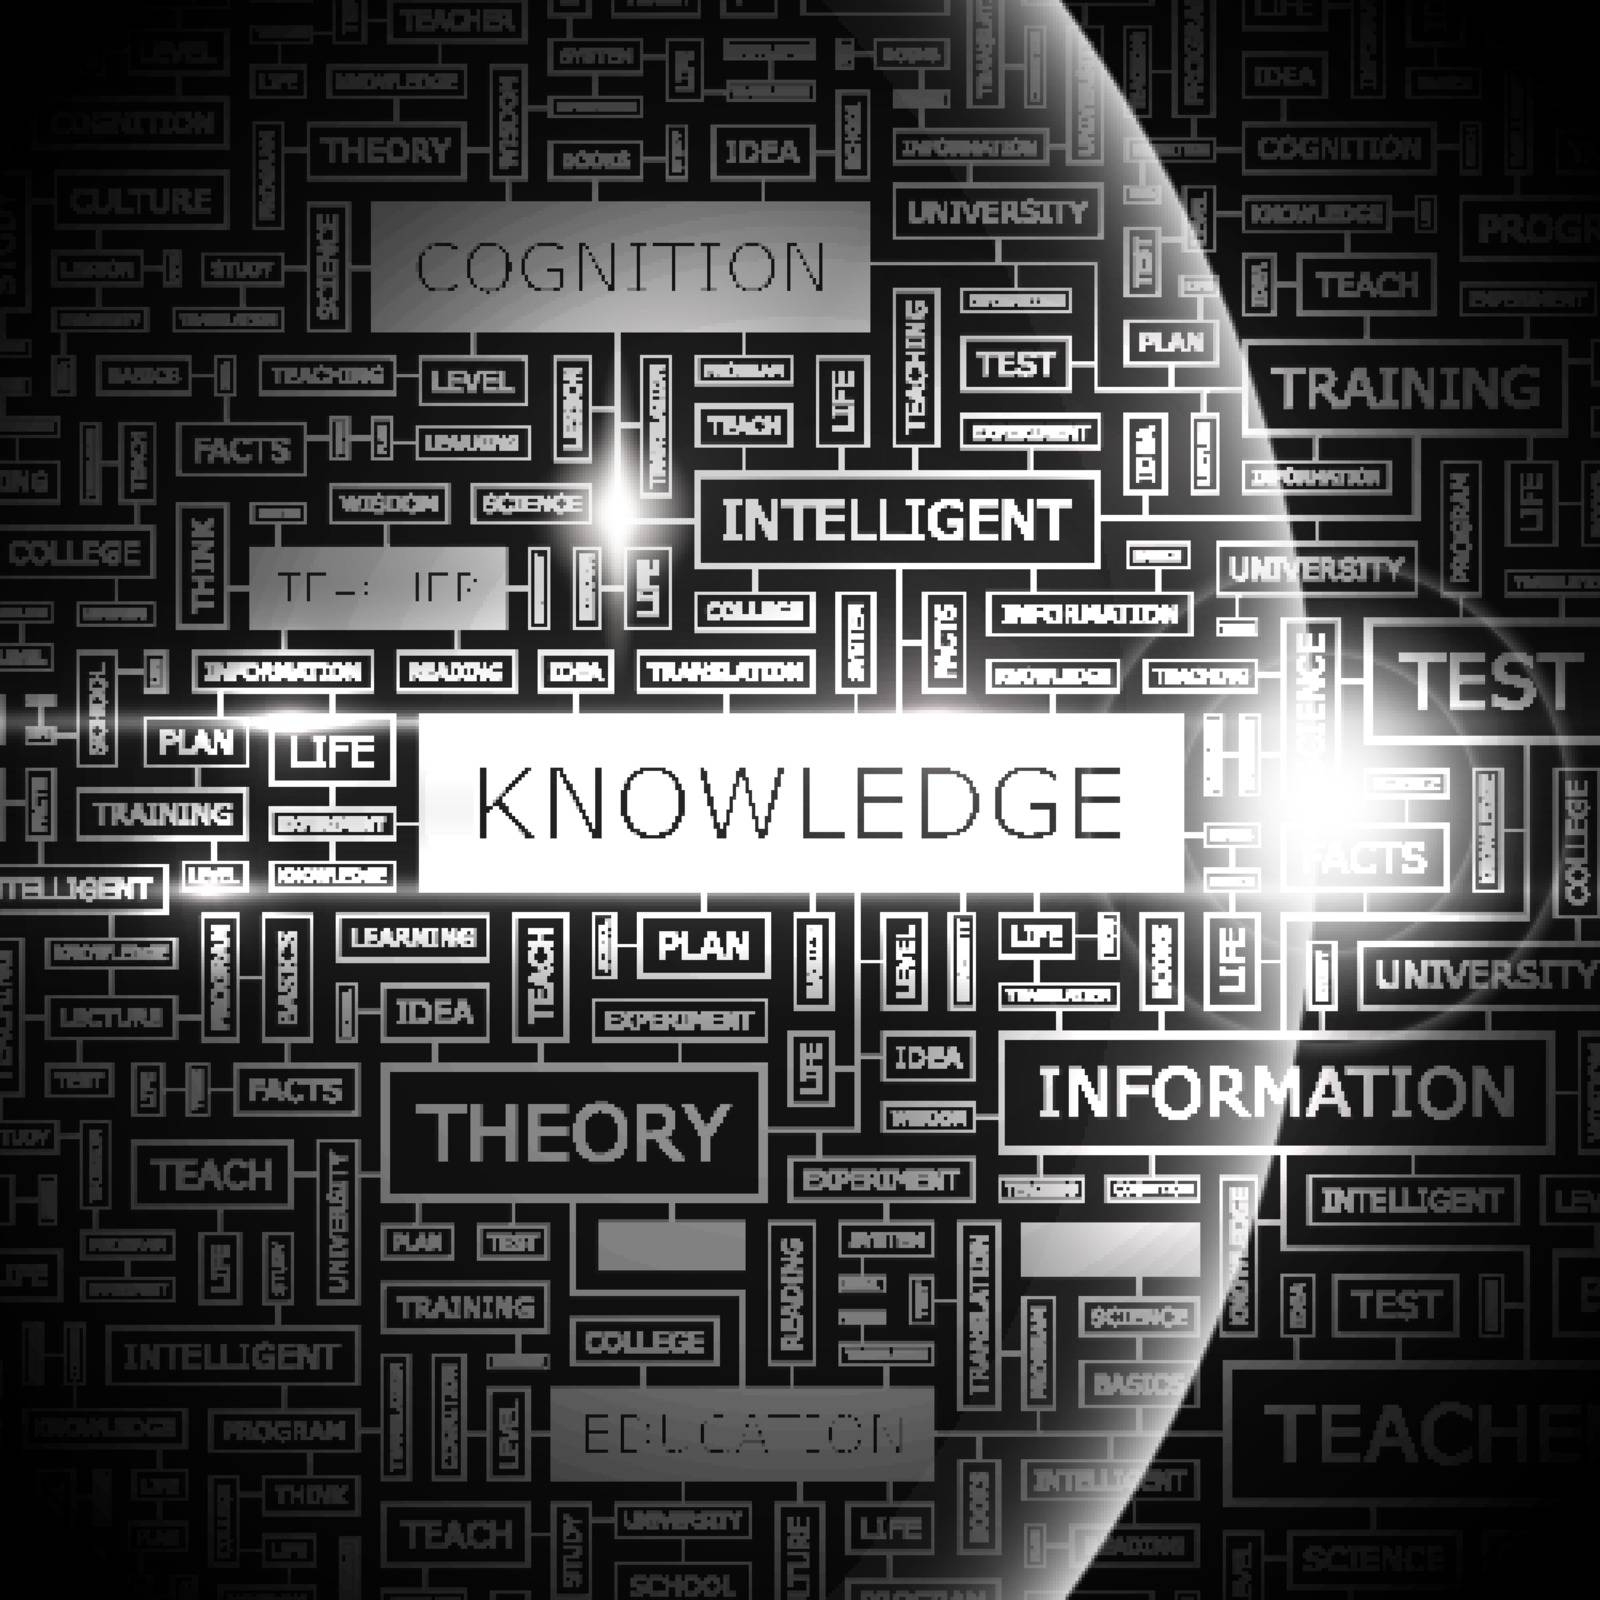 KNOWLEDGE. Word cloud concept illustration. Wordcloud collage.